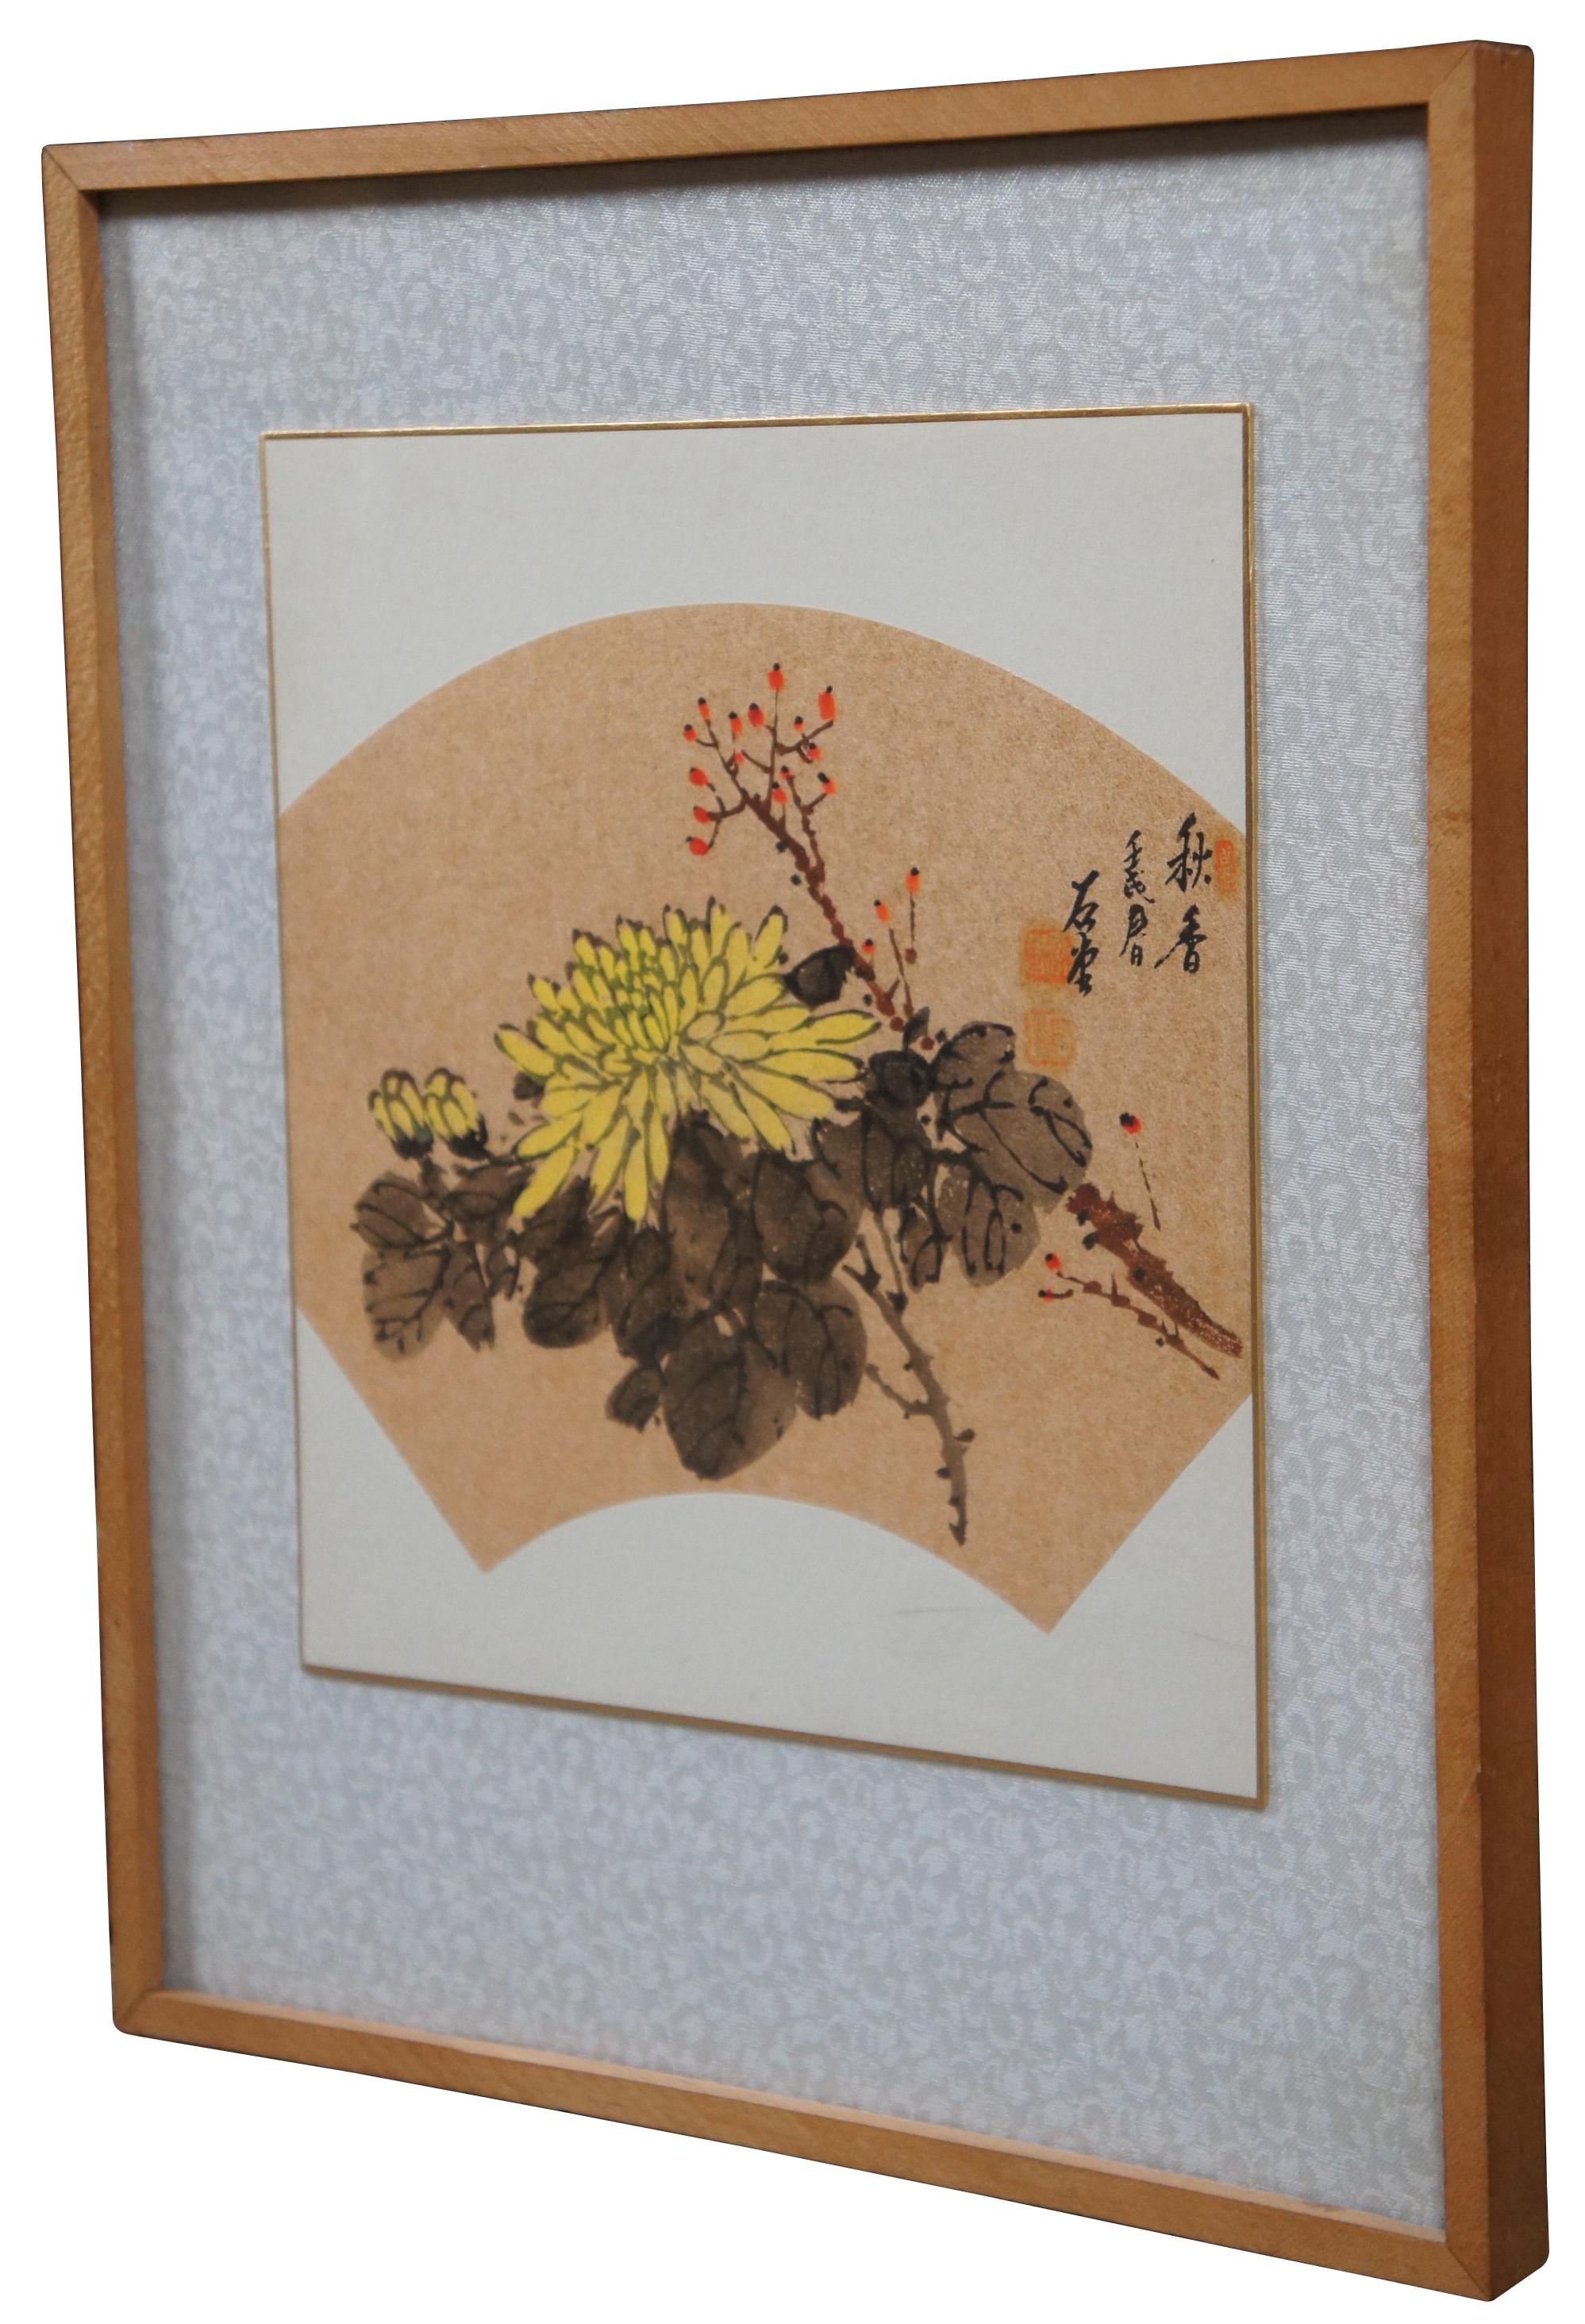 1982 Shi Tang and Mr. Ren Chinese watercolor fan painting aptly titled Fragrance of Autumn. It features chrysanthemums and willow flowers. Signed on the front with calligraphy on the back. Circa May 1982.

1 ???? bái wang xian sheng Mr. Bai Wang